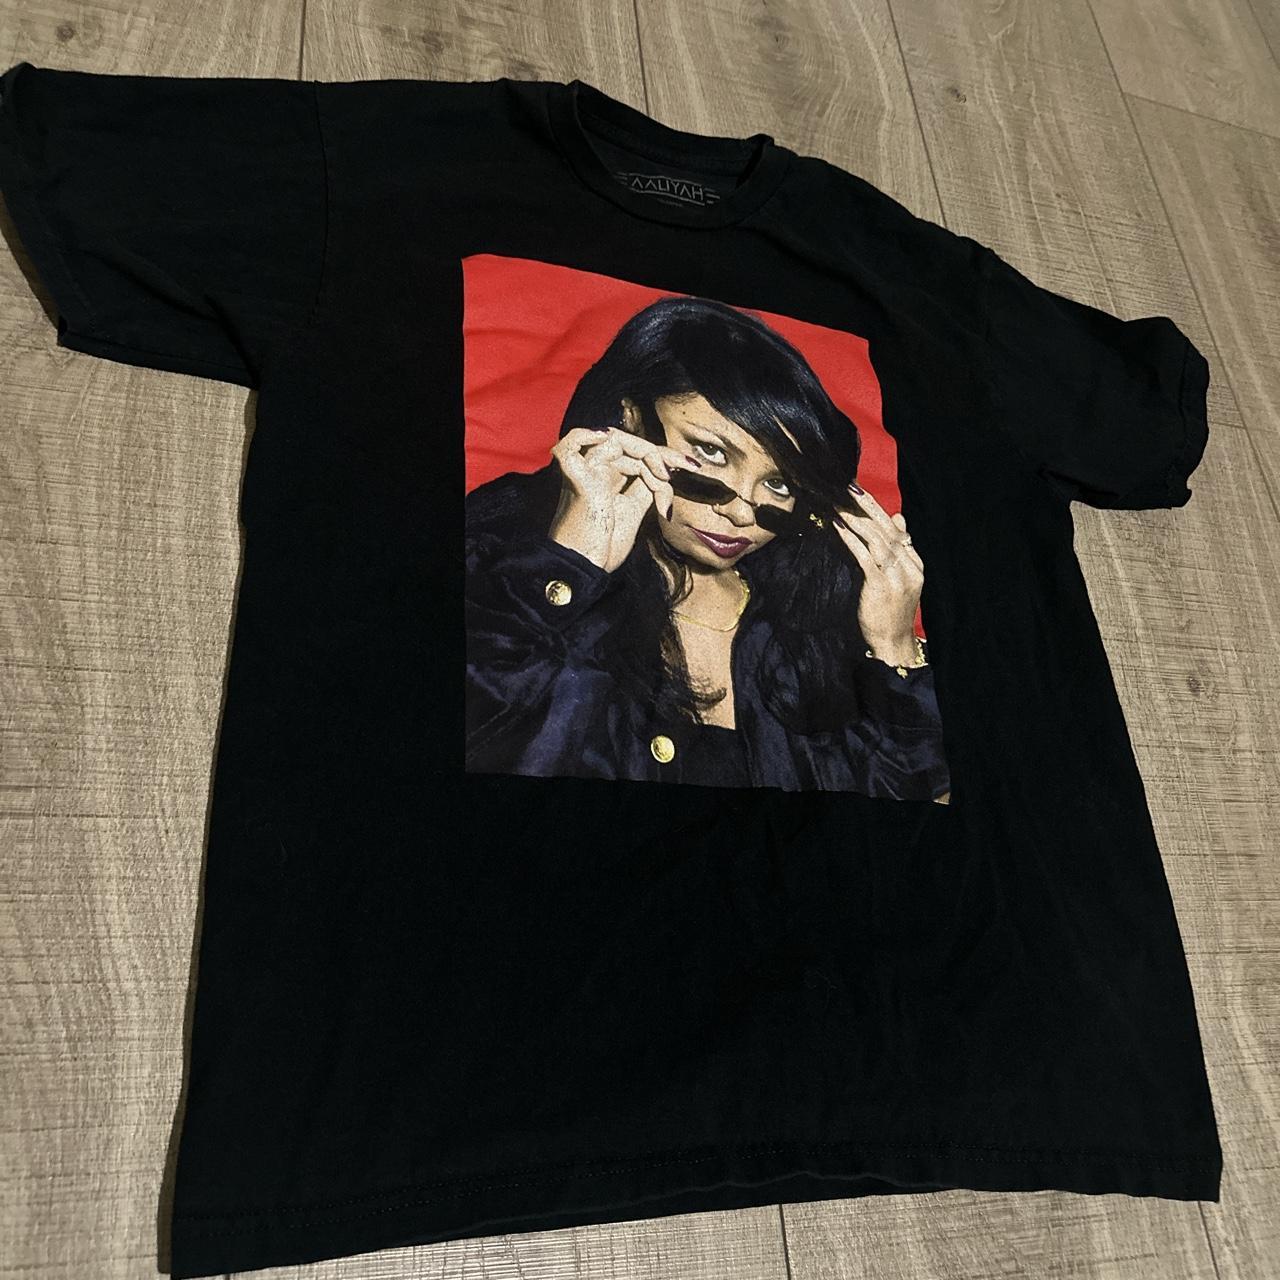 aaliyah graphic tee size M (true to size) - Depop